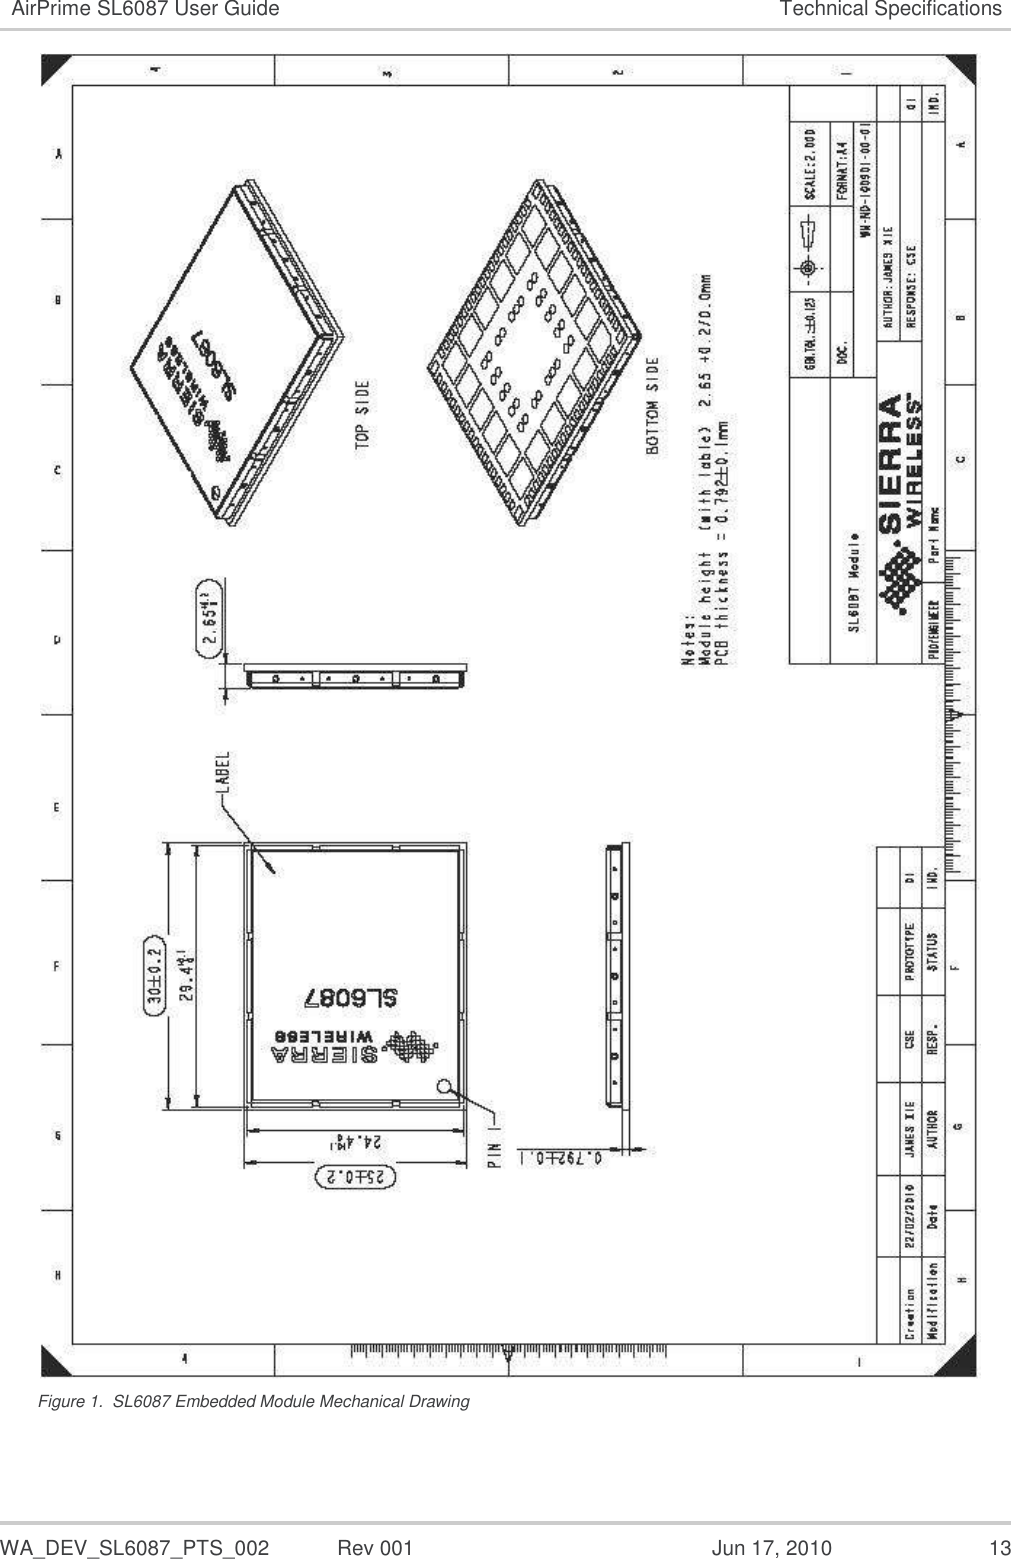  WA_DEV_SL6087_PTS_002  Rev 001  Jun 17, 2010  13 AirPrime SL6087 User Guide Technical Specifications  Figure 1.  SL6087 Embedded Module Mechanical Drawing 